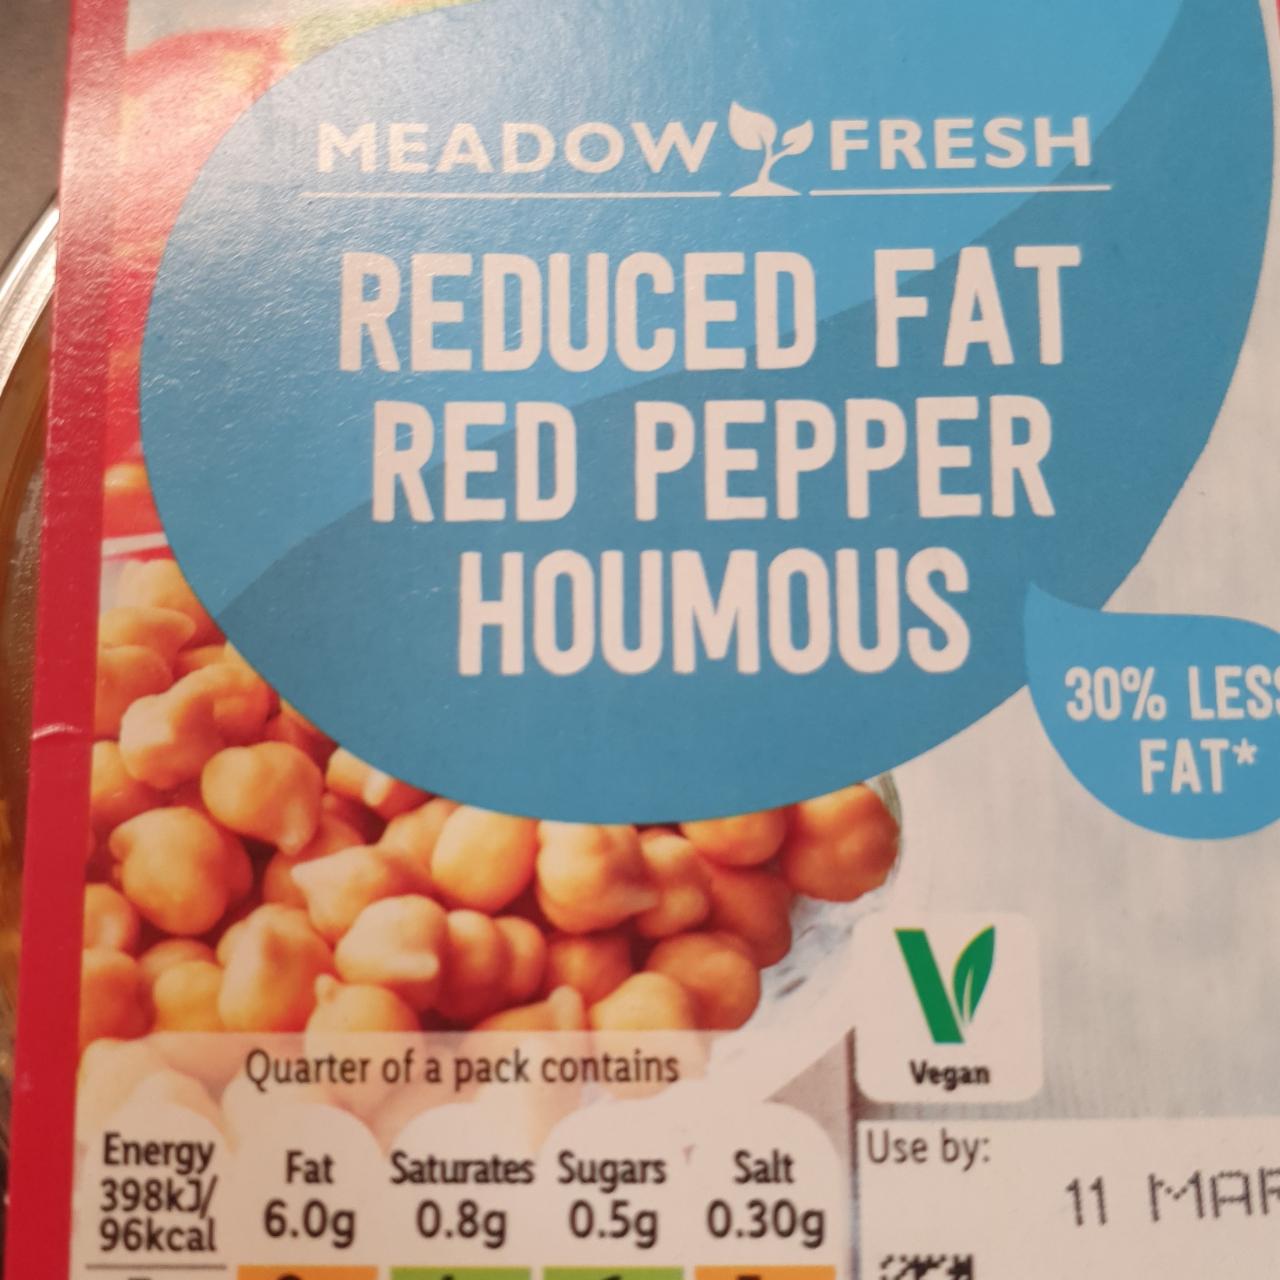 Fotografie - Reduced fad red pepper houmous Meadow Fresh